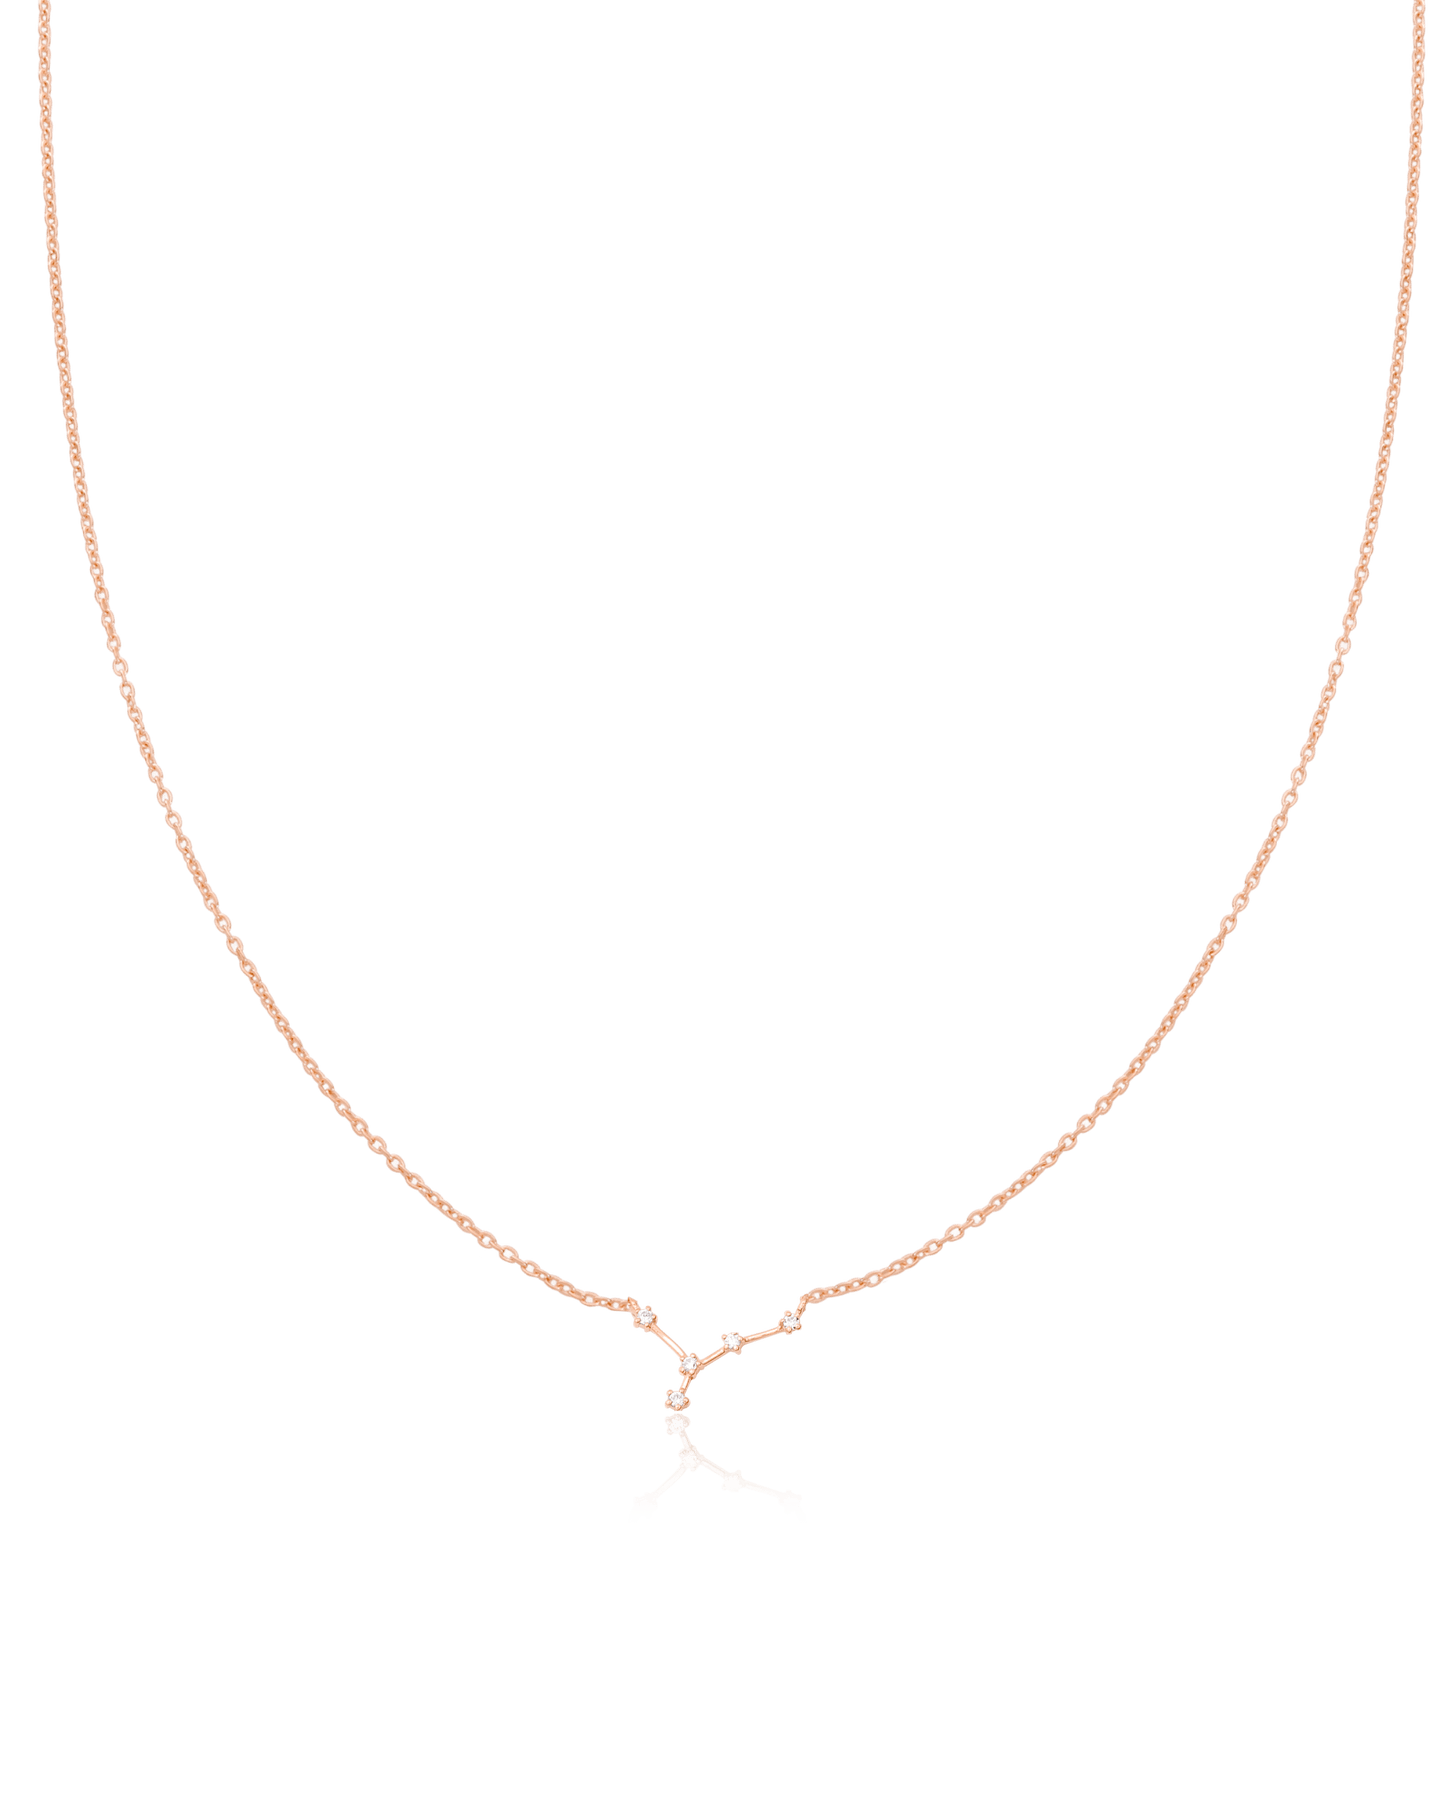 Cancer Constellation Necklace - 925 Sterling Silver Necklaces magal-dev 